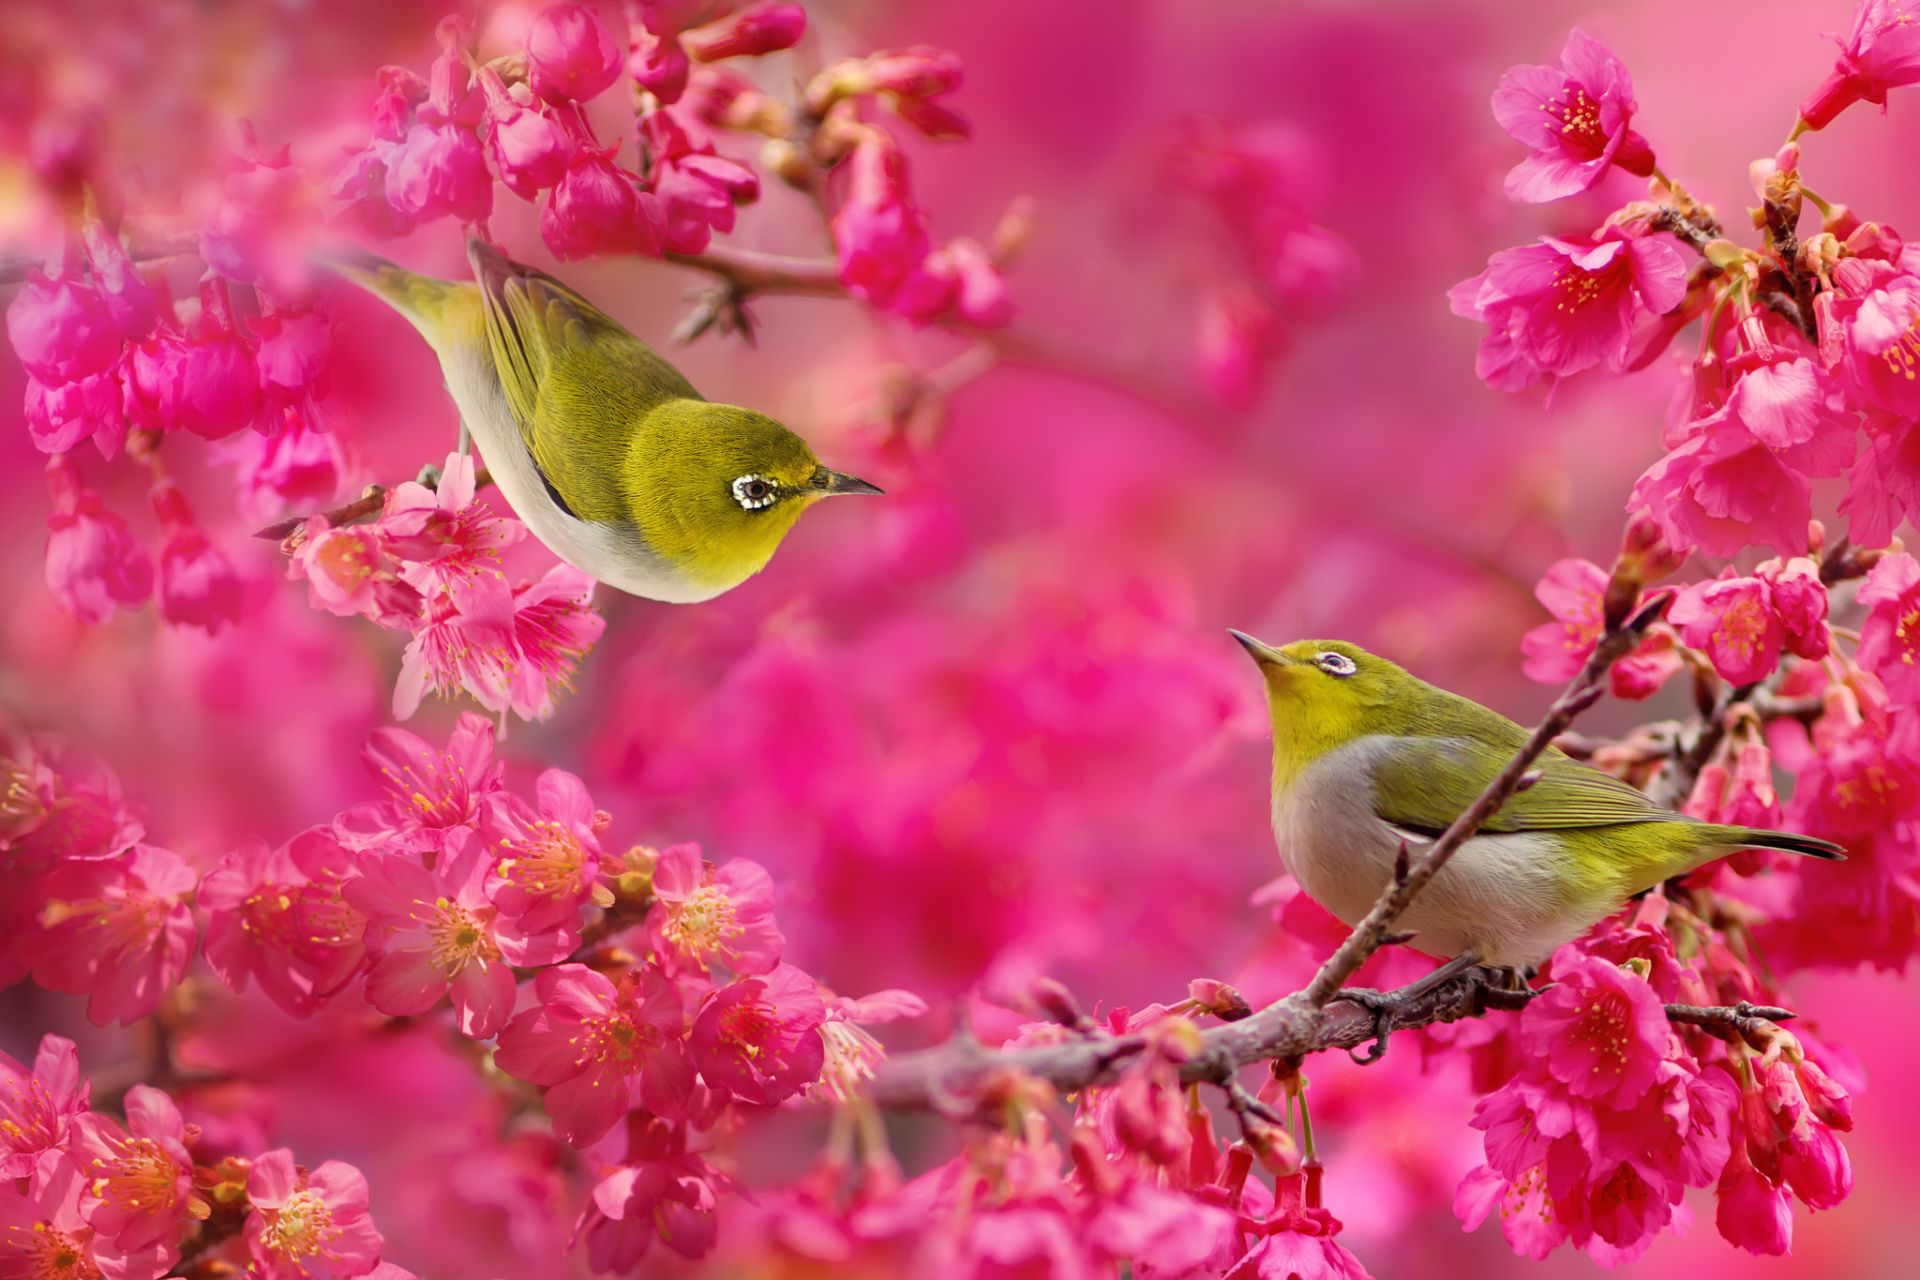 Cute Bird Picture with Most Beautiful Colors